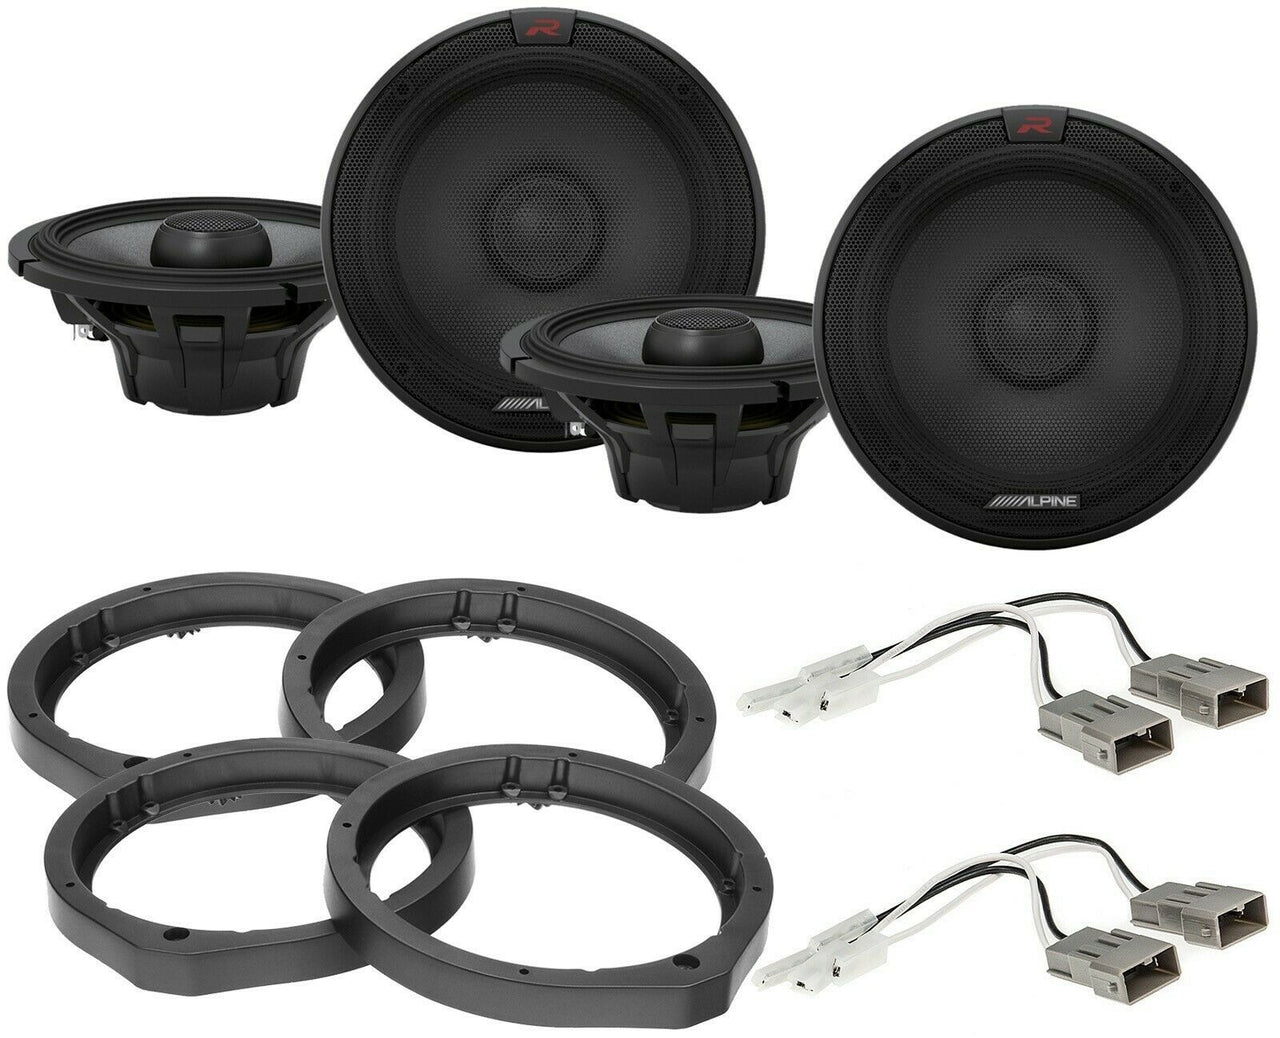 2 Alpine R-S65.2 6.5" Speaker Package With Speaker Adapter and Harness For Select Honda and Acura Vehicles